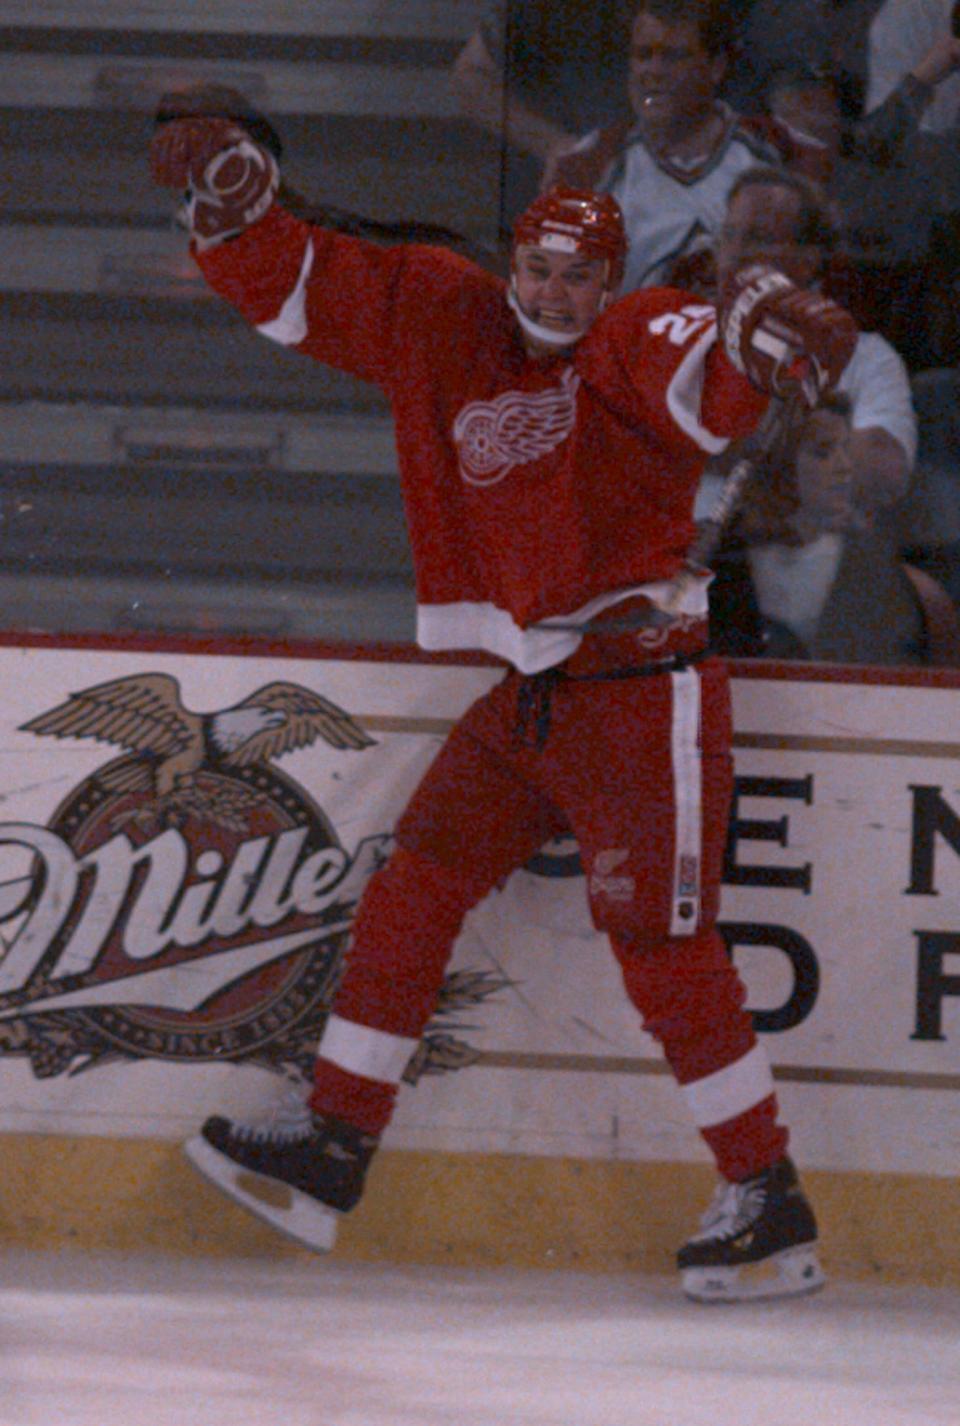 Detroit Red Wings' Darren McCarty raises his arms in jubilation after scoring the team's fourth goal late in the third period against the Colorado Avalanche during Game 2 of the Western Conference finals at McNichols Sports Arena in Denver, May 17, 1997.